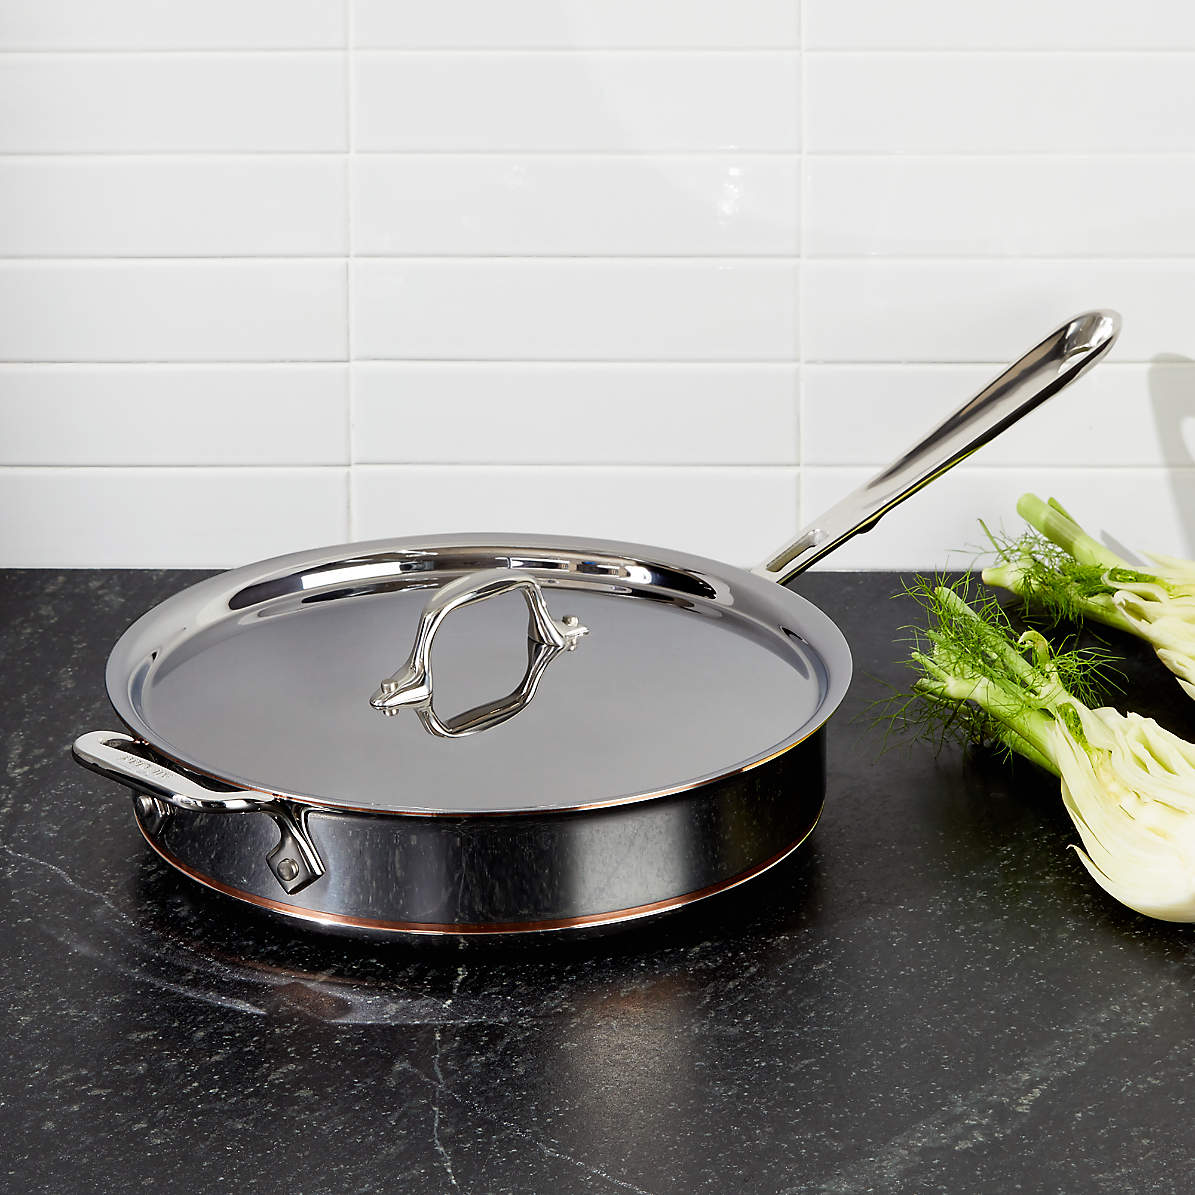 All-Clad d3 Stainless Steel 6 qt. Saute Pan with Lid